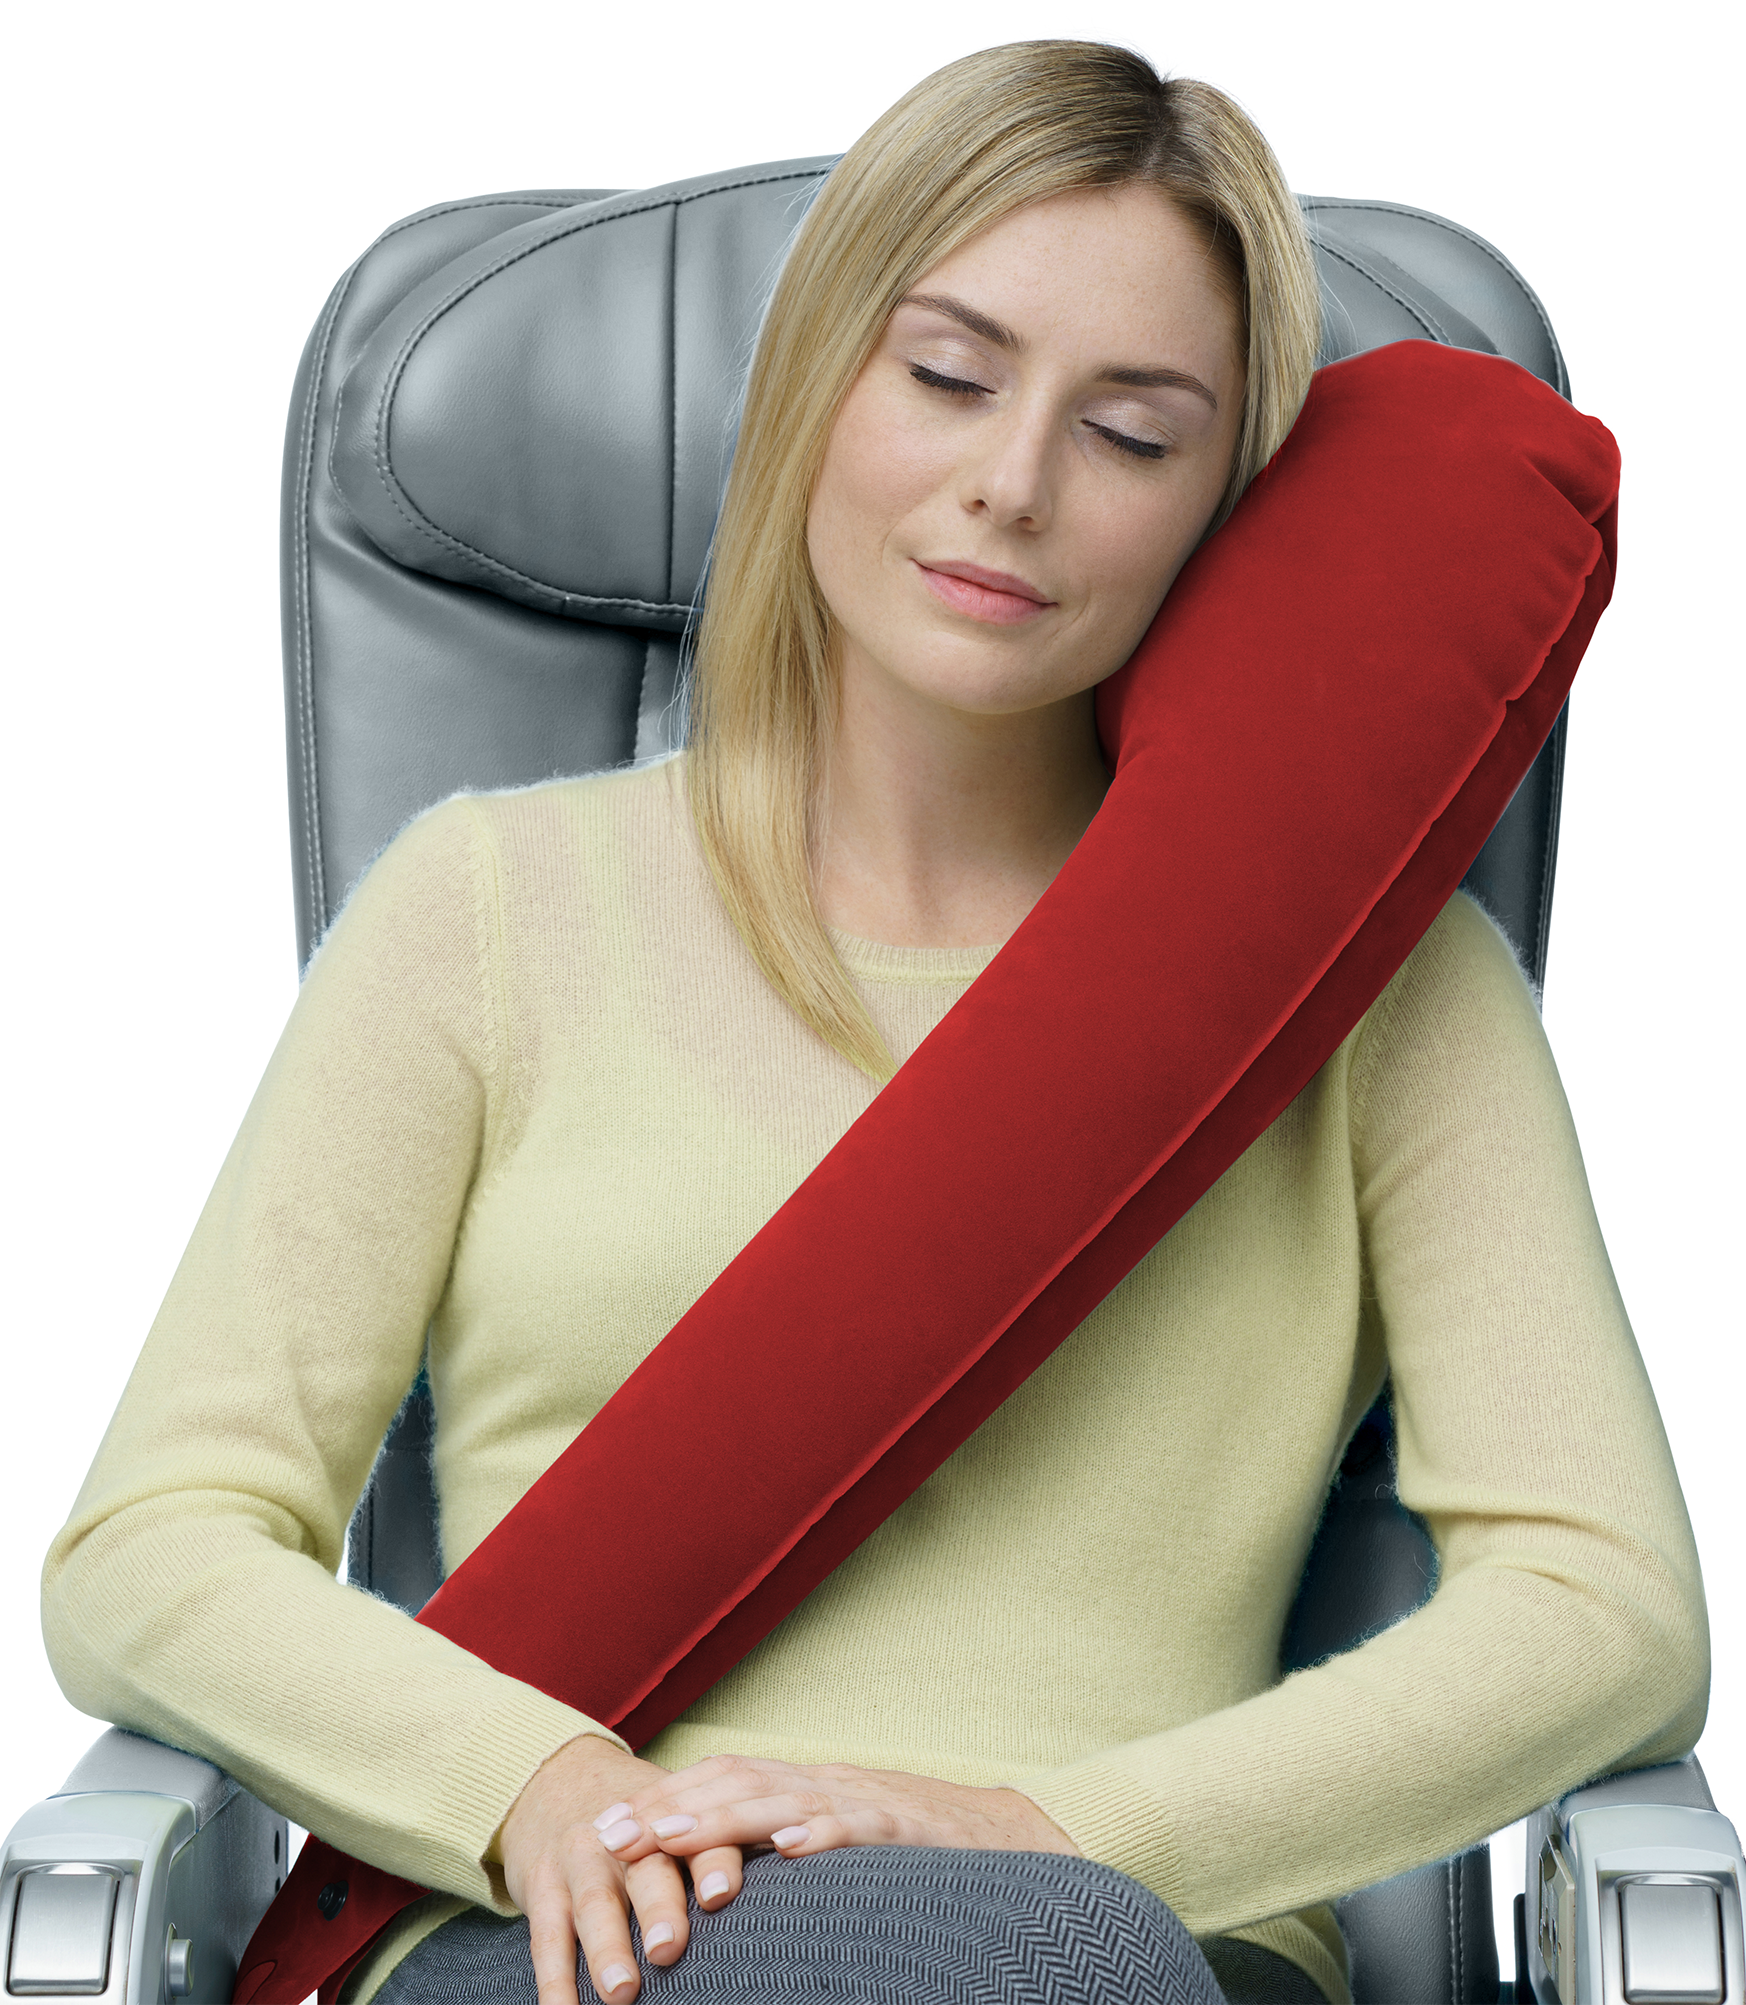 TRAVELREST Ultimate Travel, Neck & Body Pillow - Strap to Plane & Car Seat  - Compact, Comfort and Convenient for Office Napping, Airplane, Bus & Train